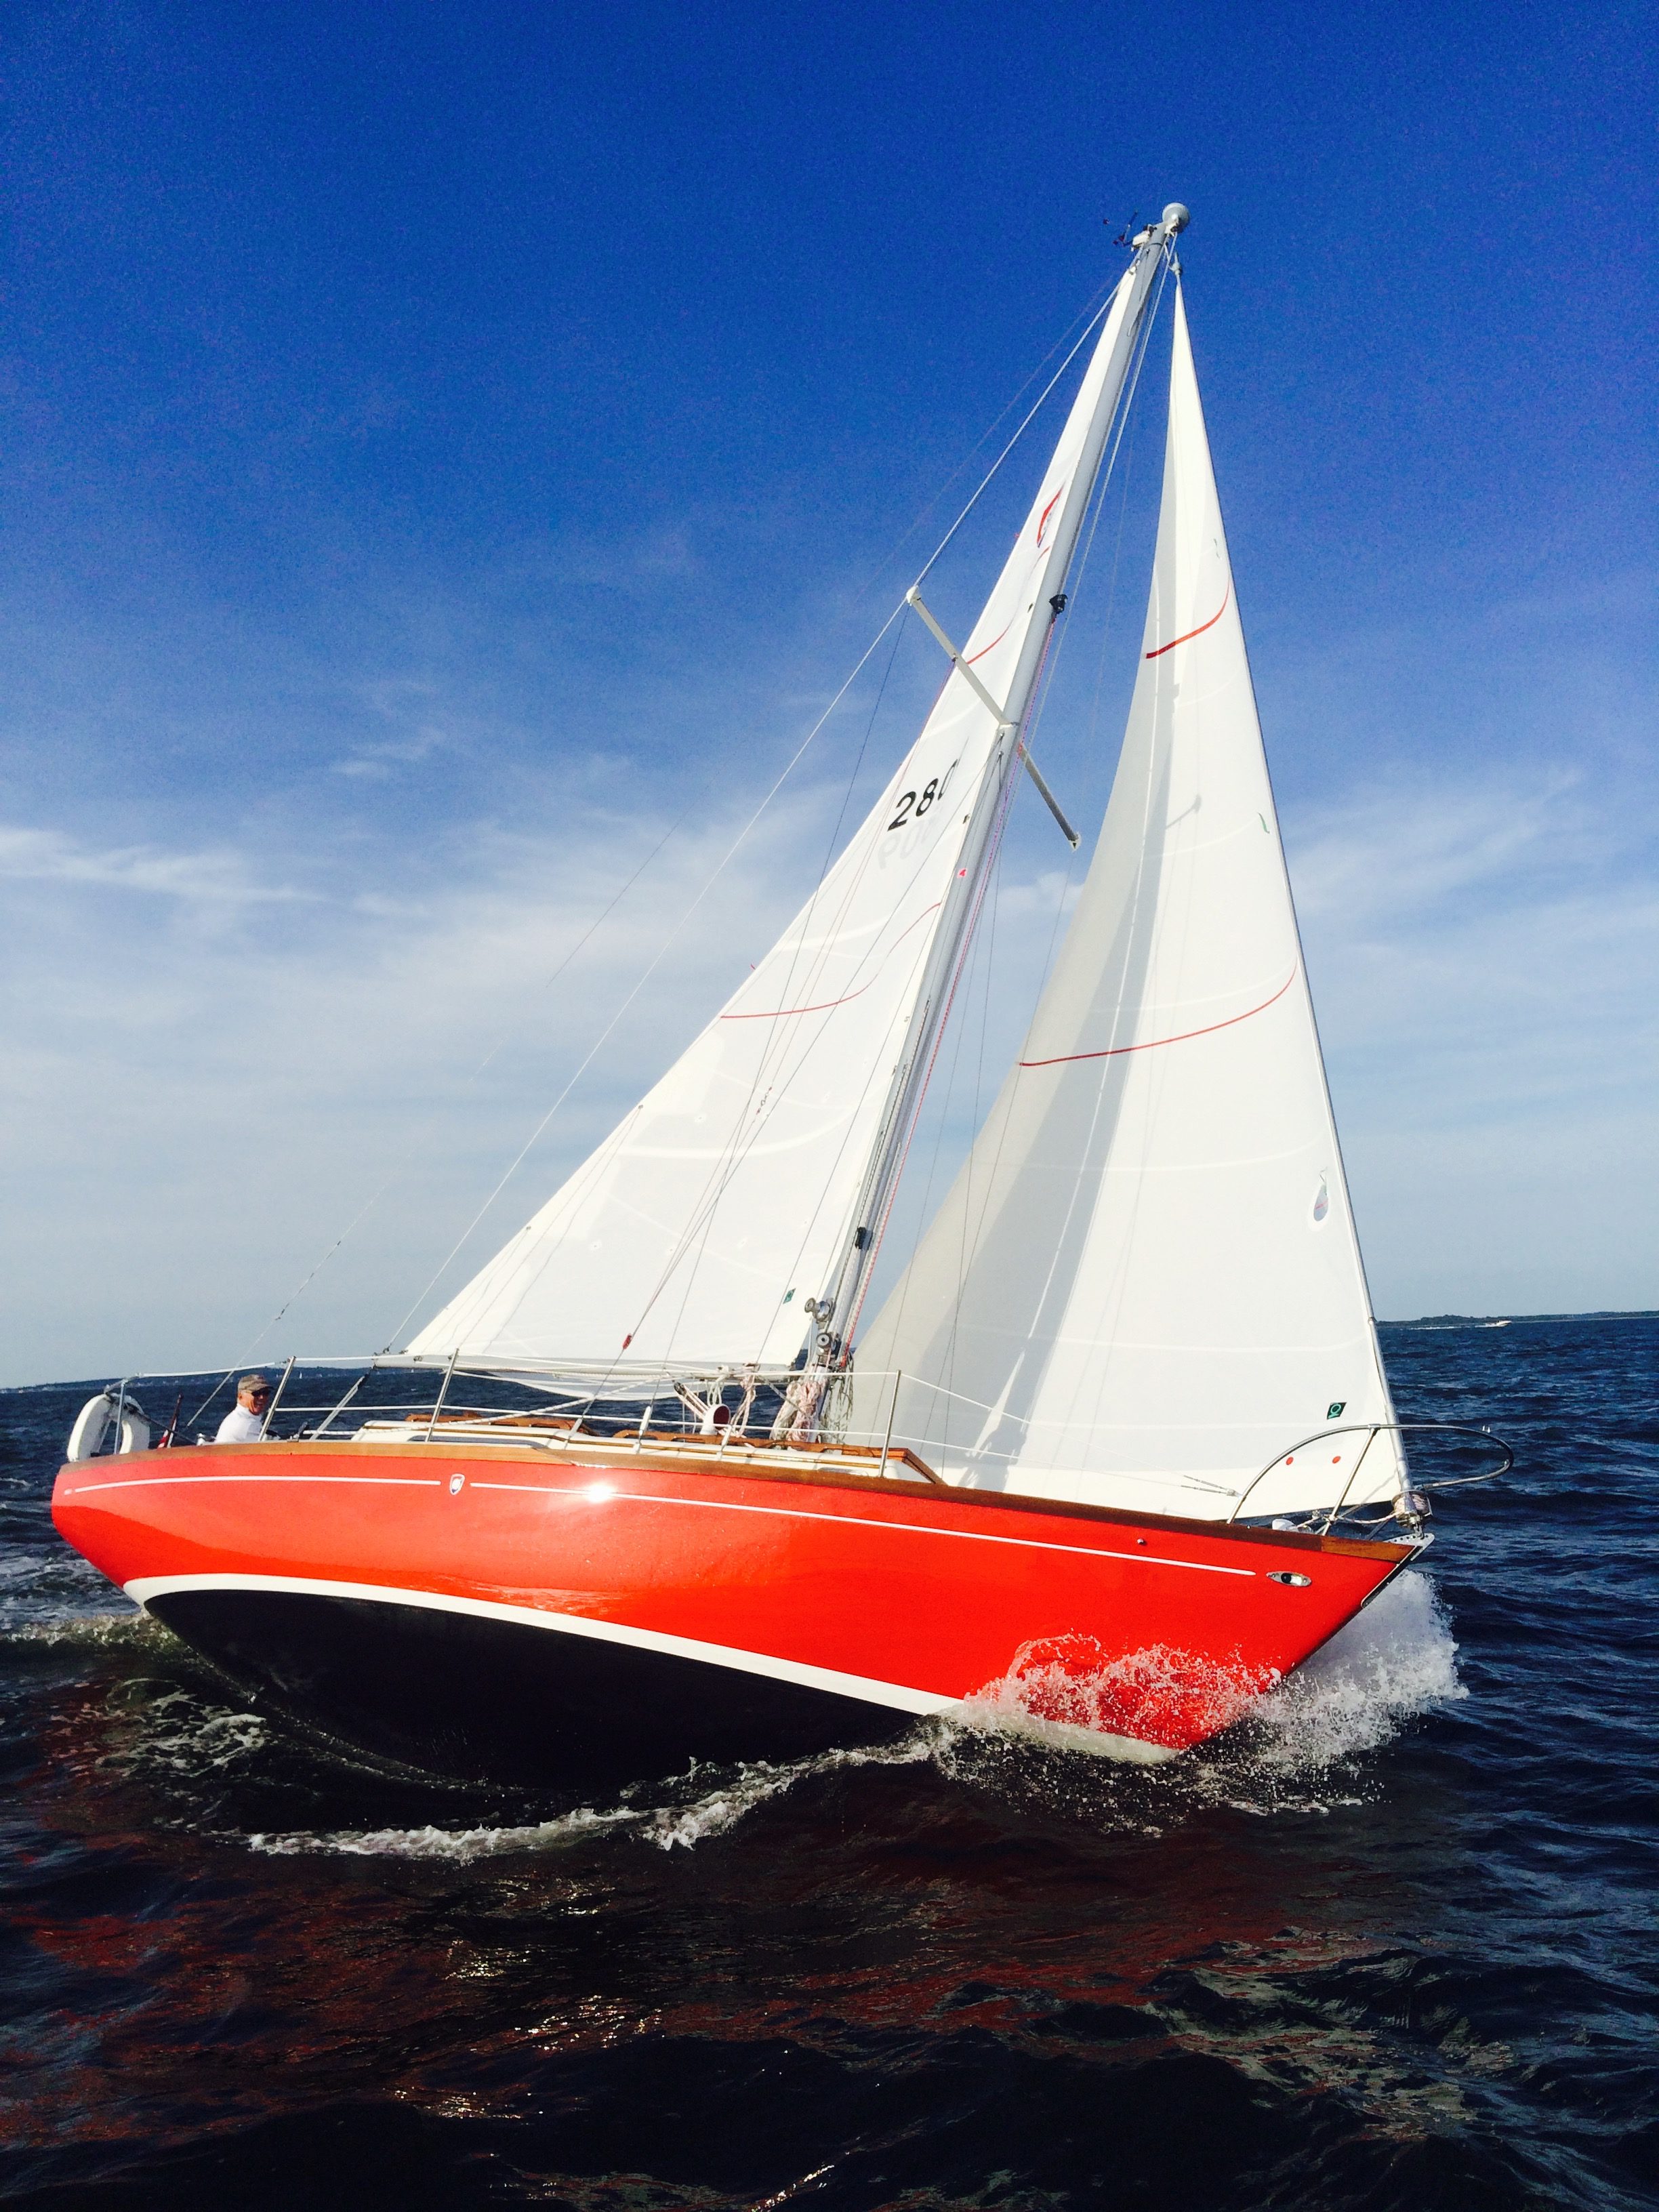 Colombia 32'- Fully restored and being enjoyed by the owner